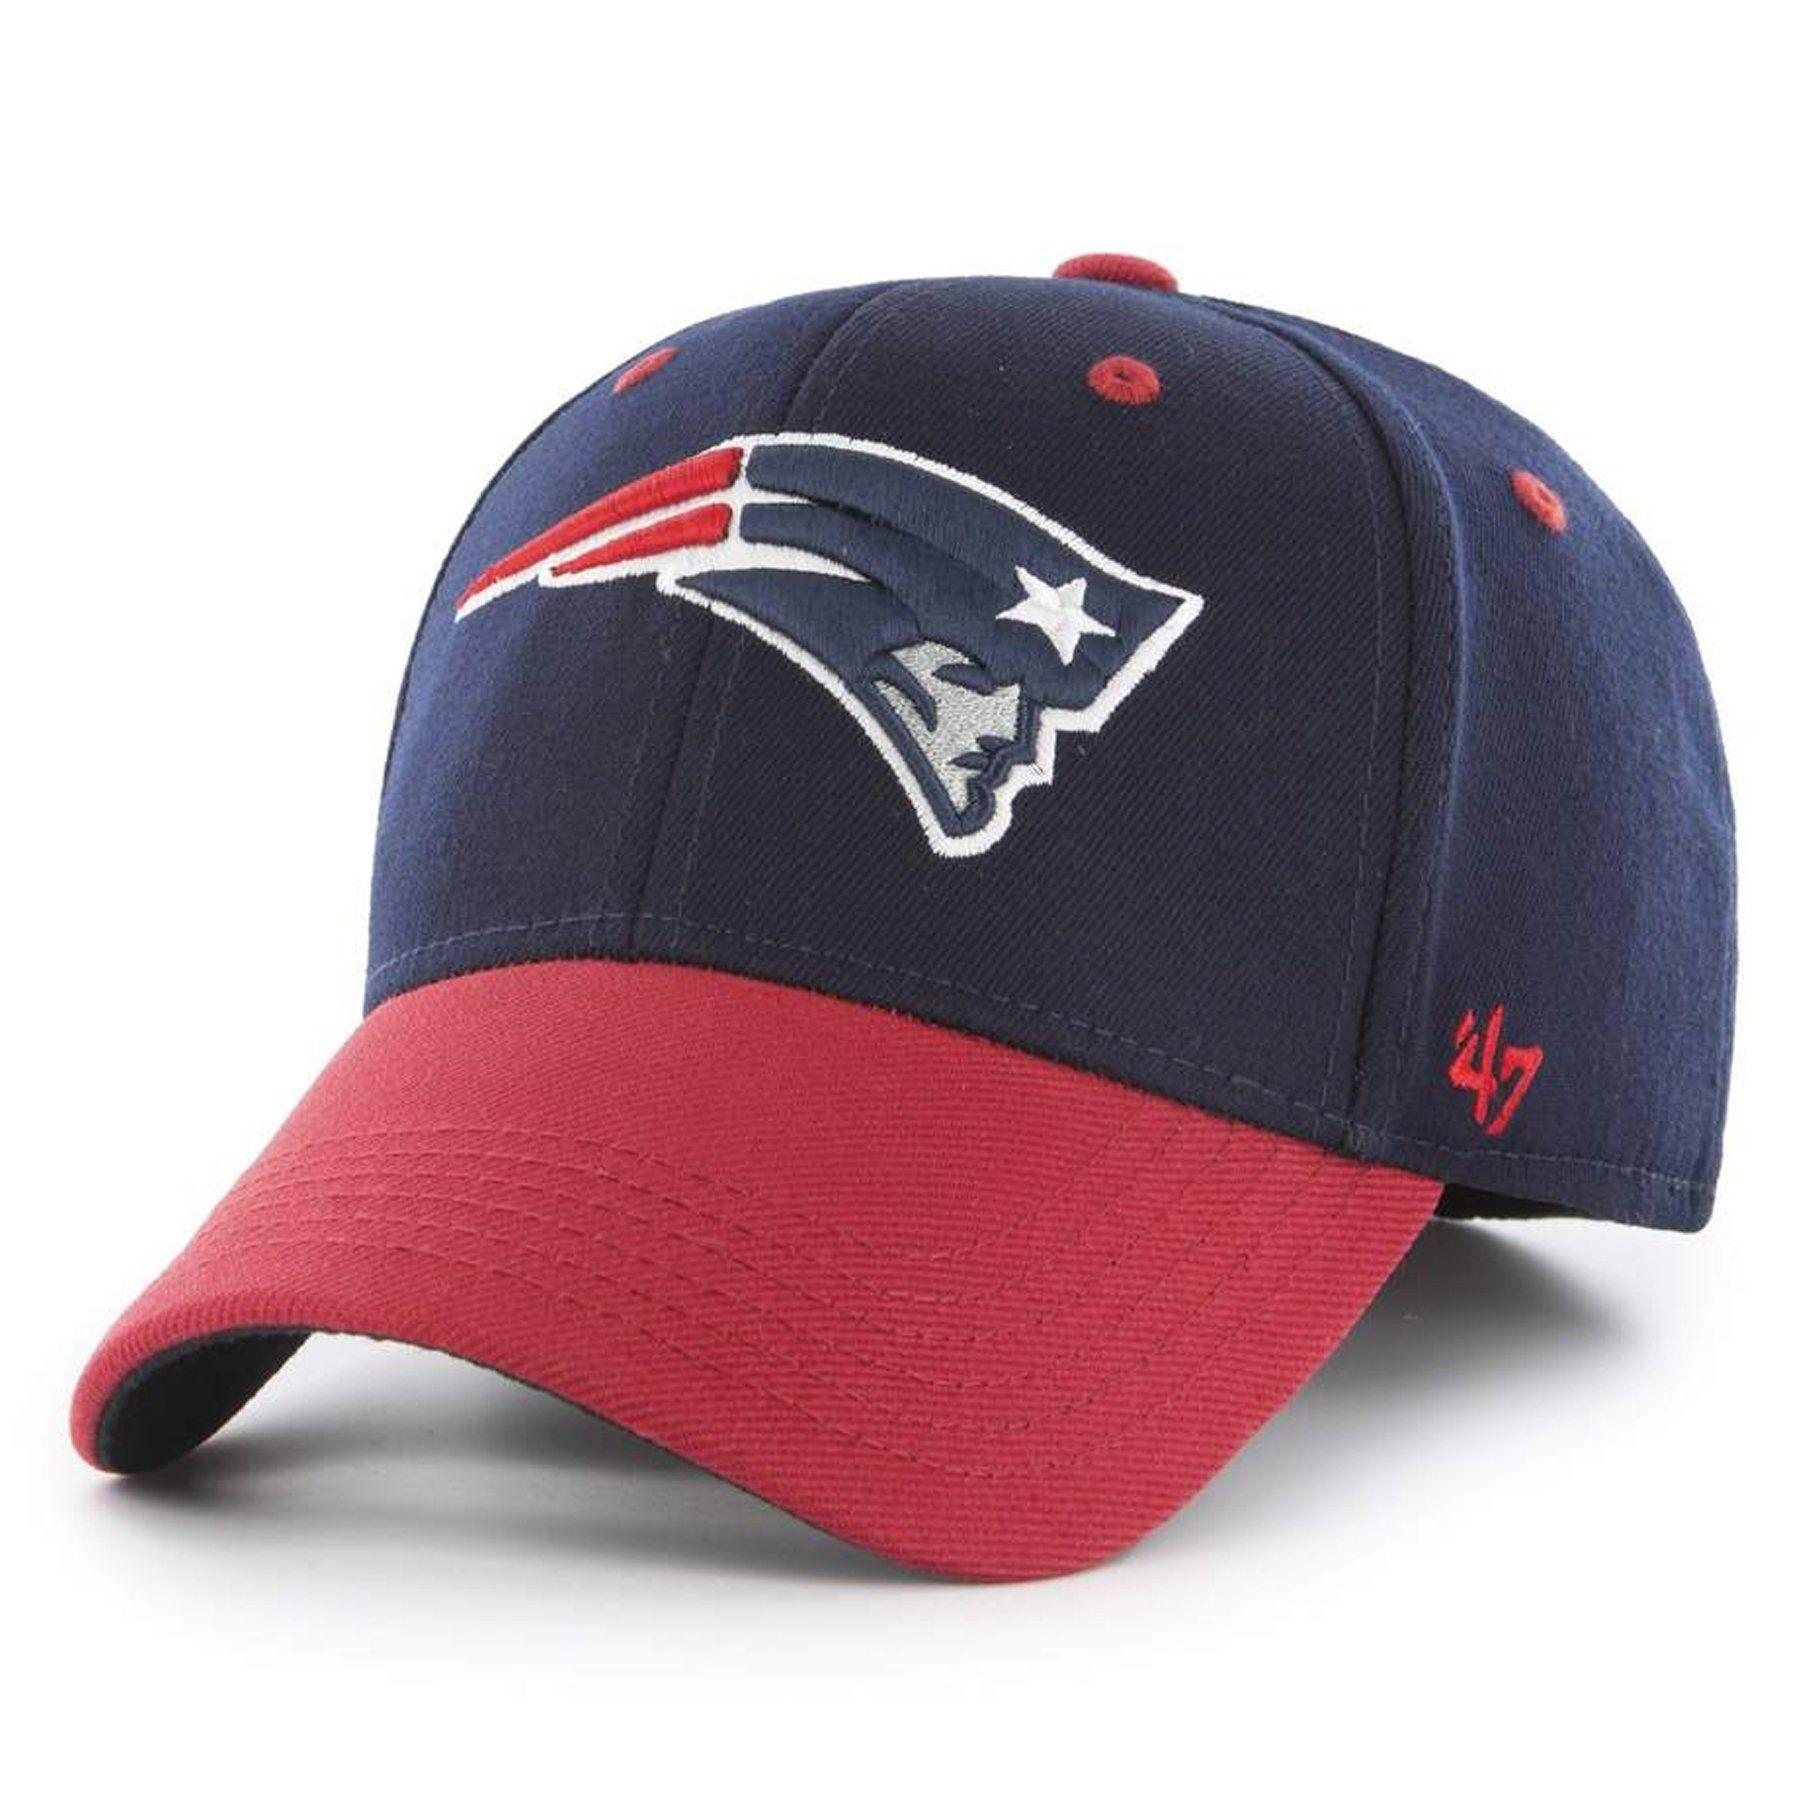 Red White and Blue Patriot Logo - New England Patriots Navy Blue on Red Stretch Fit Hat